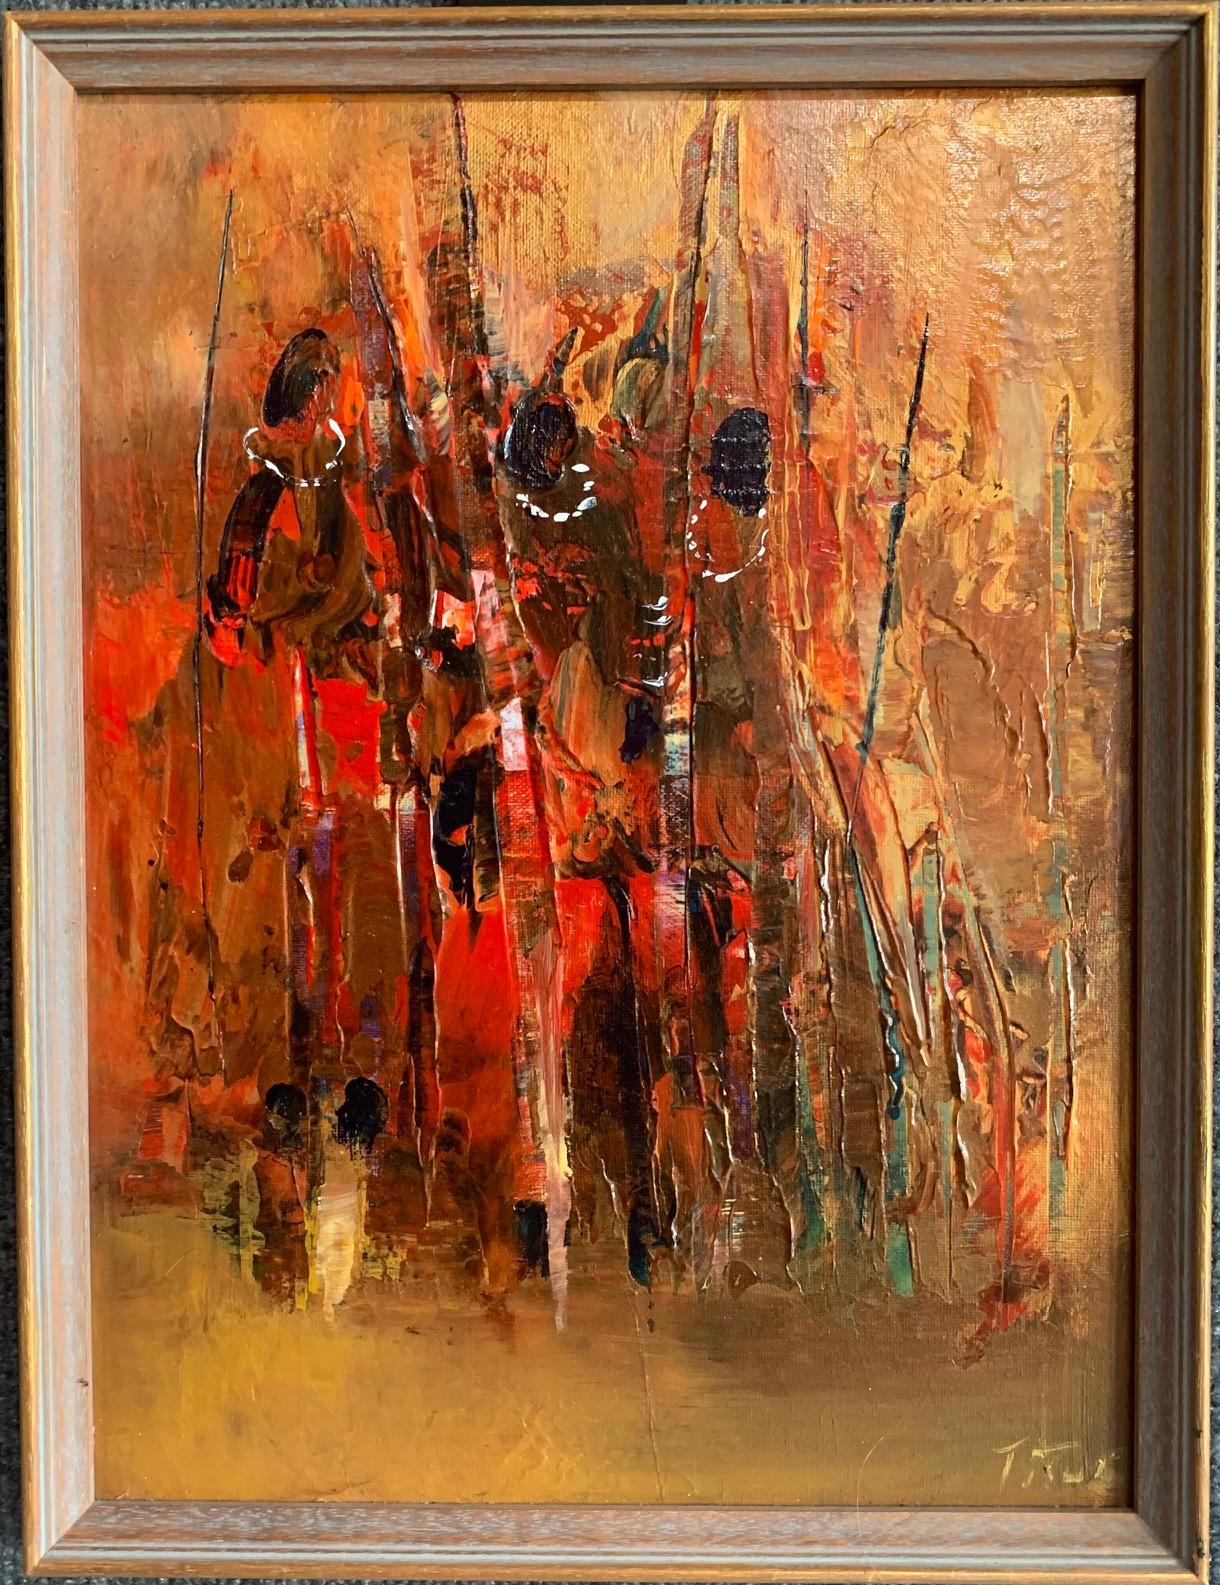 Mary Titus is widely recognized in Carmel, CA, as a top abstract painter.
Artist & teacher Mary Titus was born in Florida in 1950, she moved to Carmel, California in 1983. 
She was told she was an artist at a very young age. Started selling at age